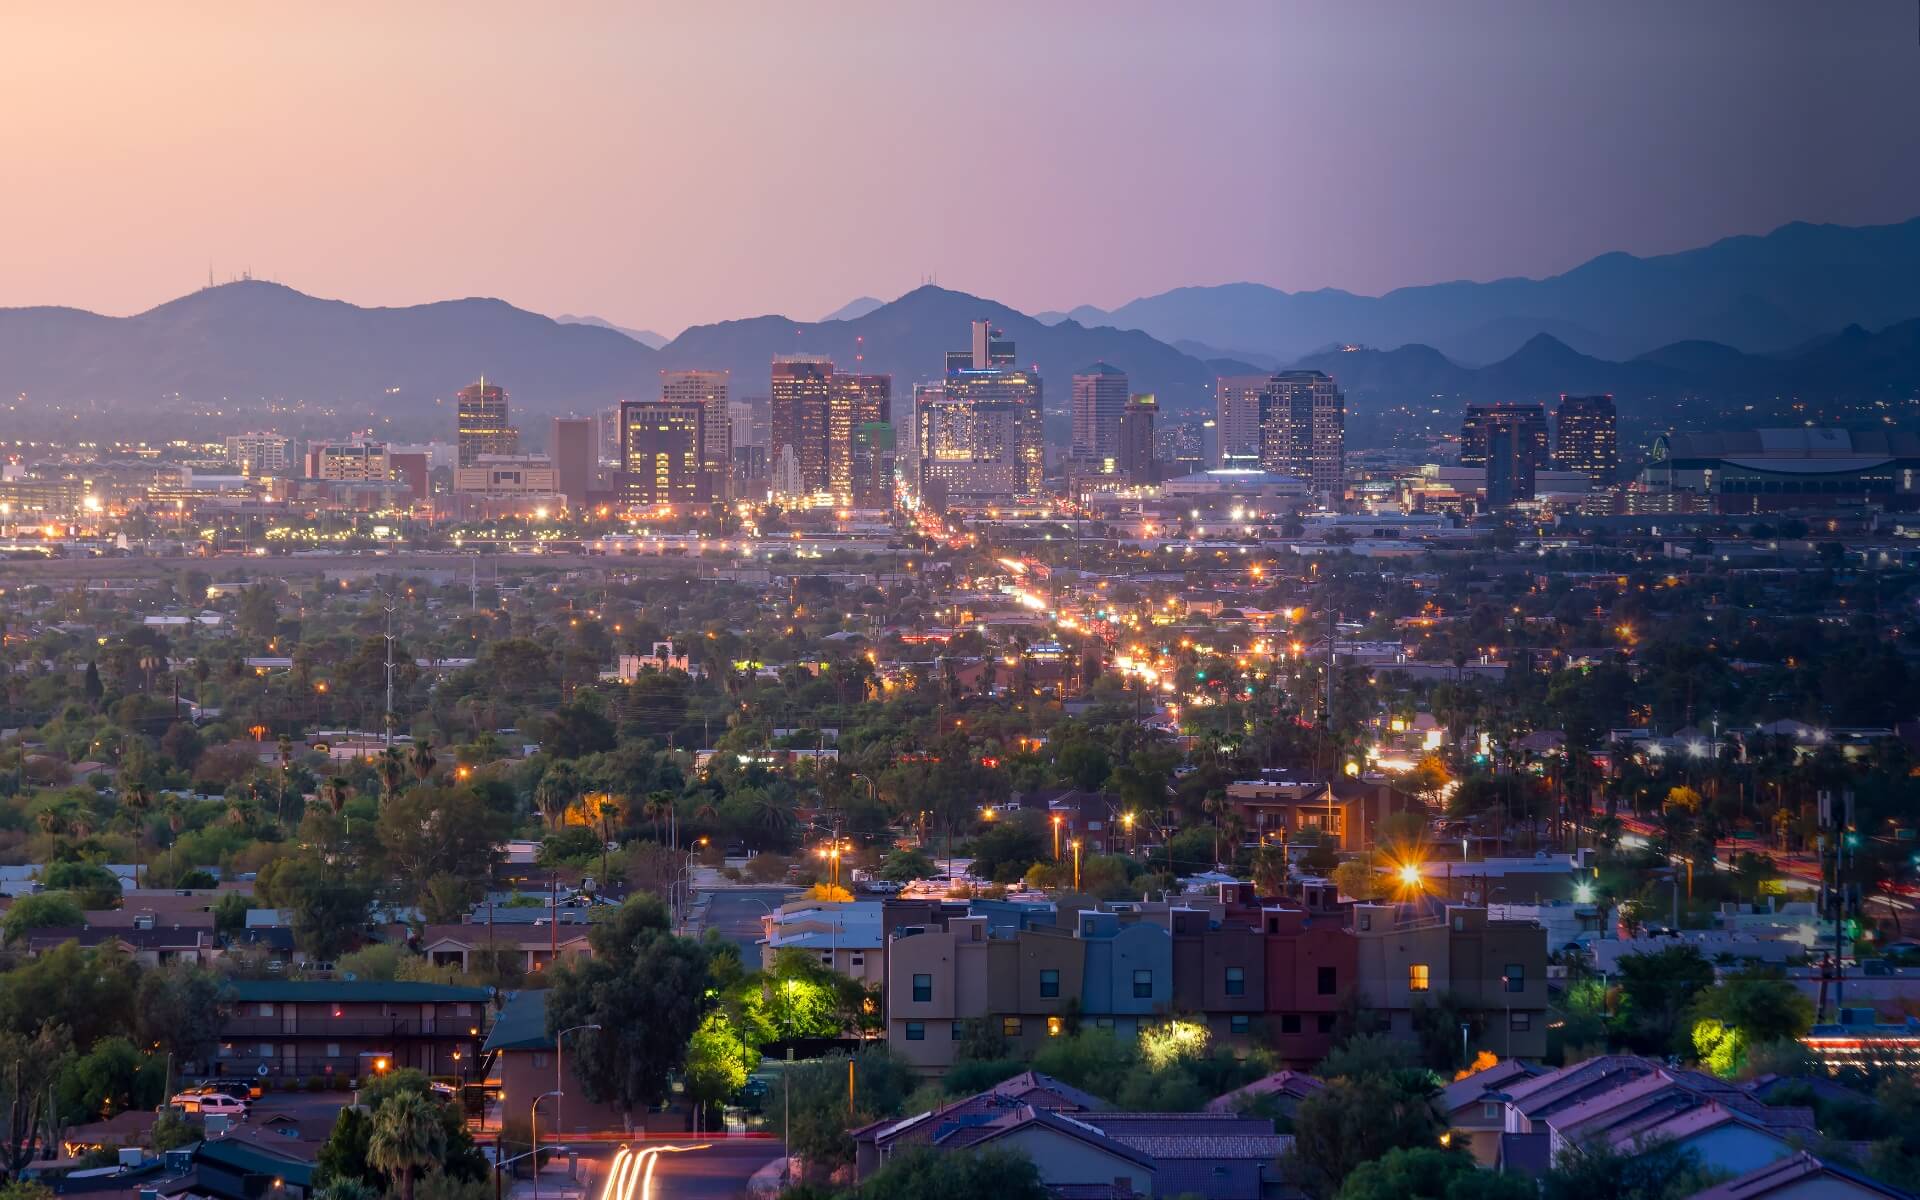 A cityscape at dusk with mountains in the background.